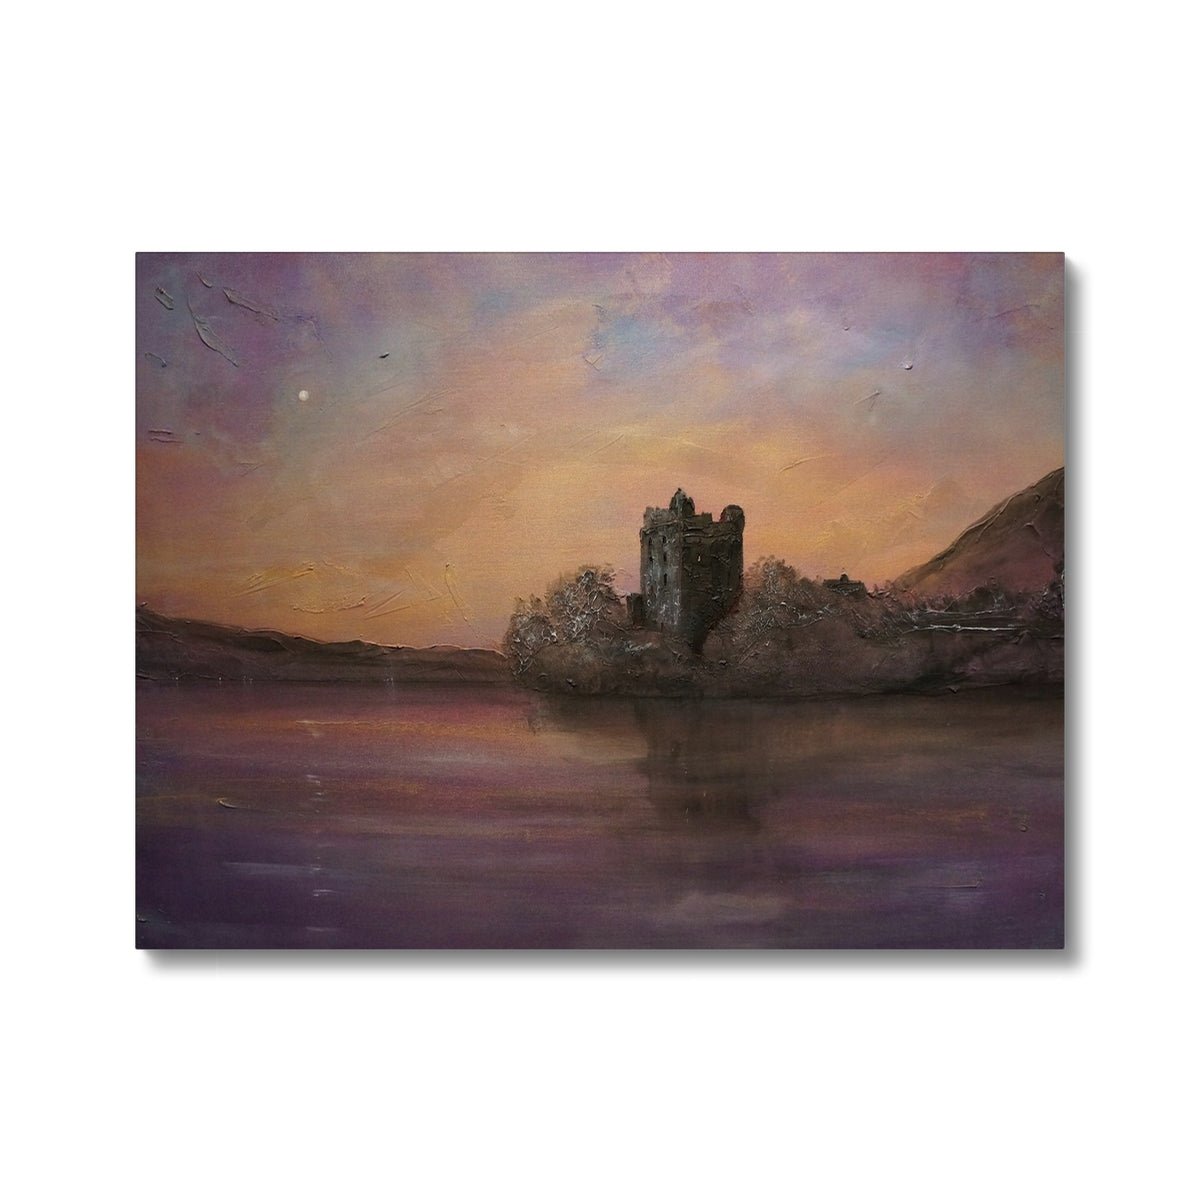 Urquhart Castle Moonlight Painting | Canvas From Scotland-Contemporary Stretched Canvas Prints-Historic & Iconic Scotland Art Gallery-24"x18"-Paintings, Prints, Homeware, Art Gifts From Scotland By Scottish Artist Kevin Hunter